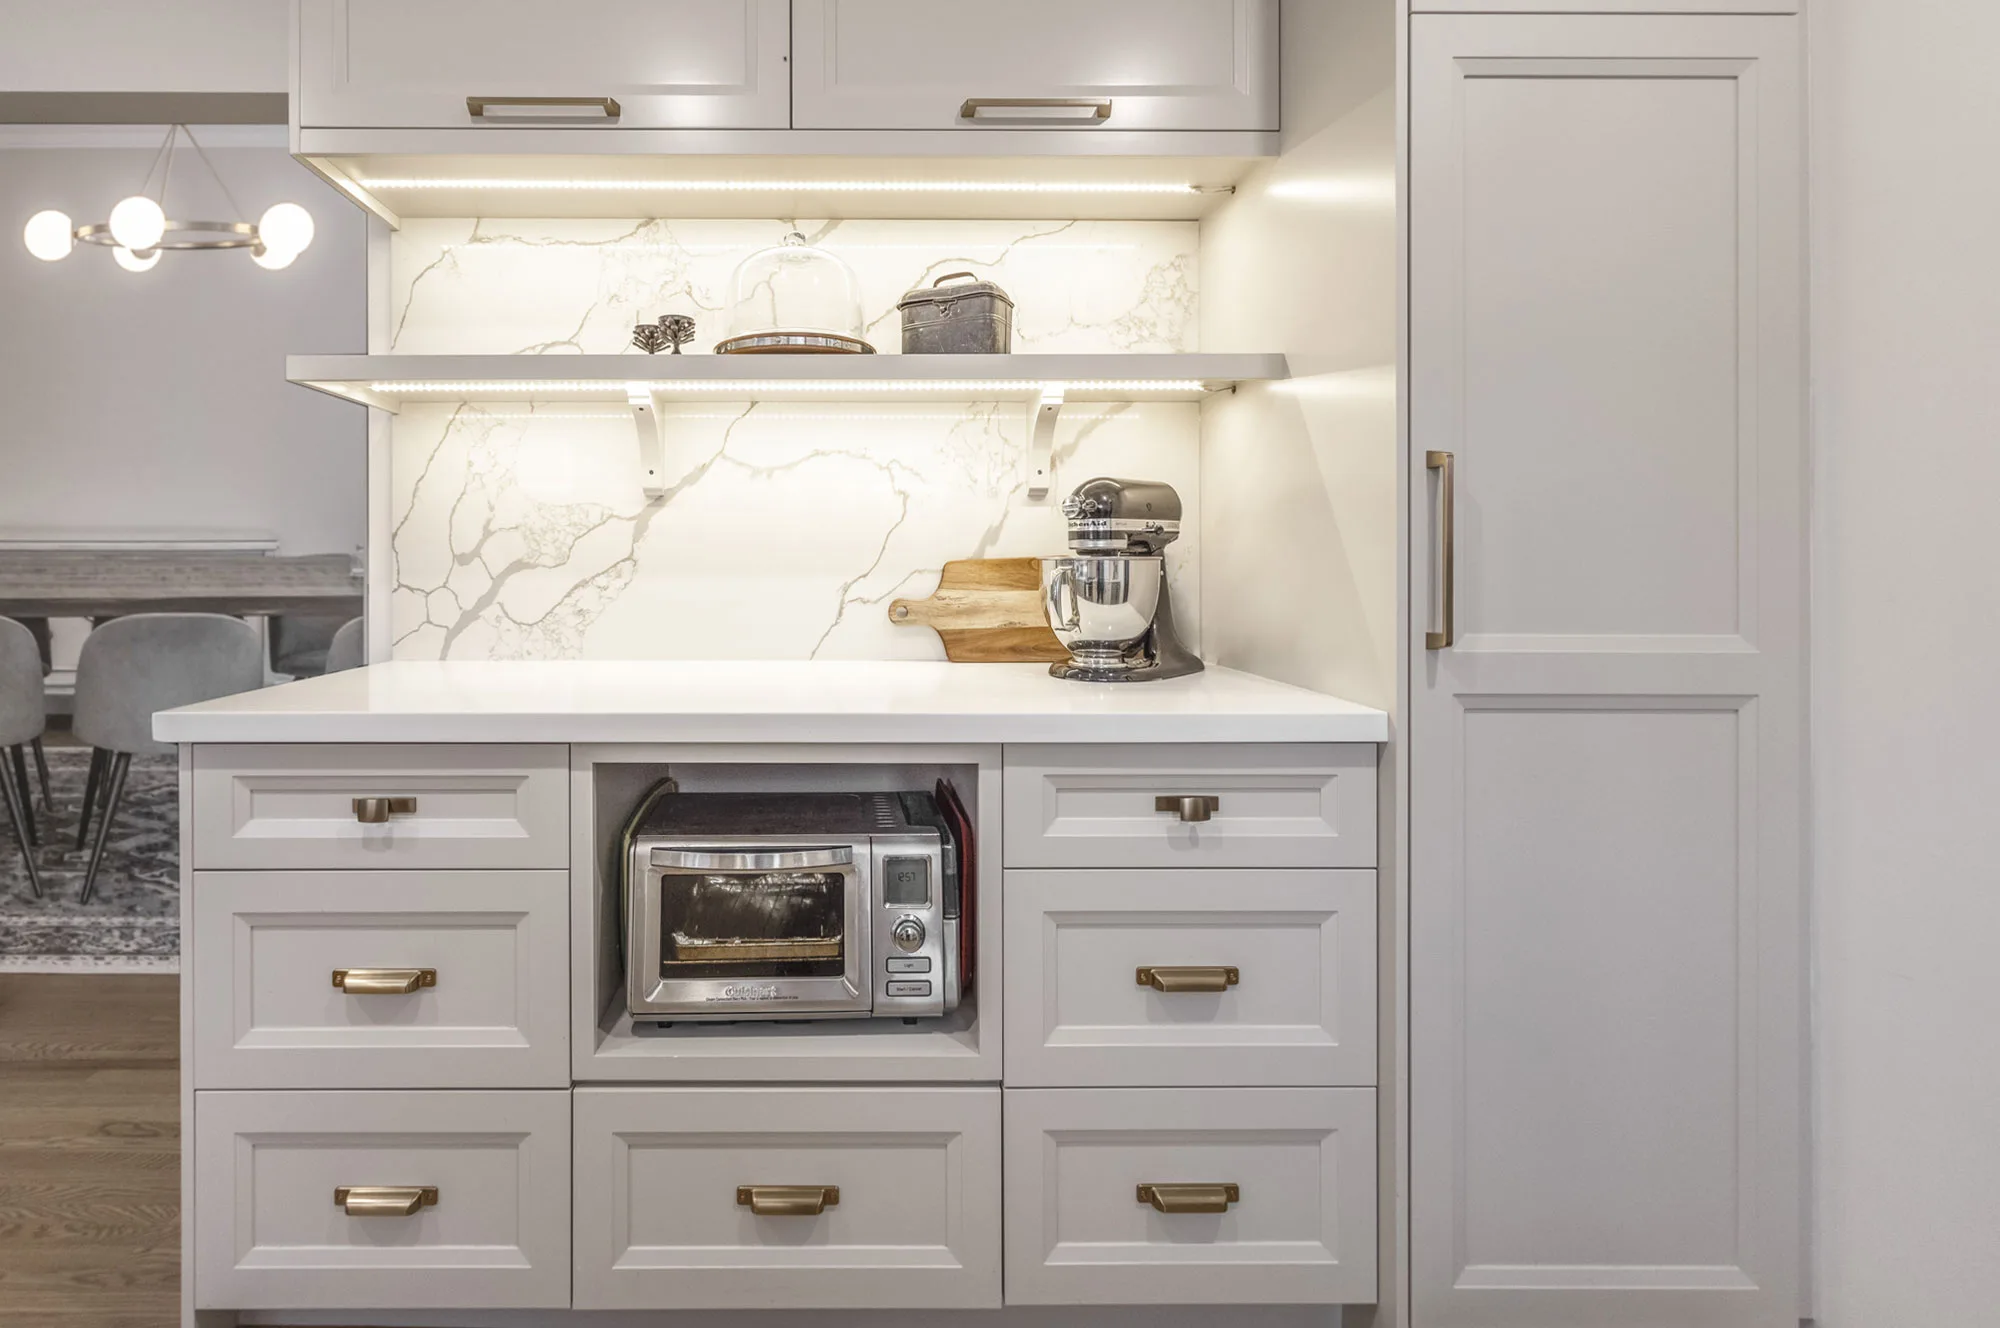 Beautiful off-white kitchen with gold handles with stainless steel applicance